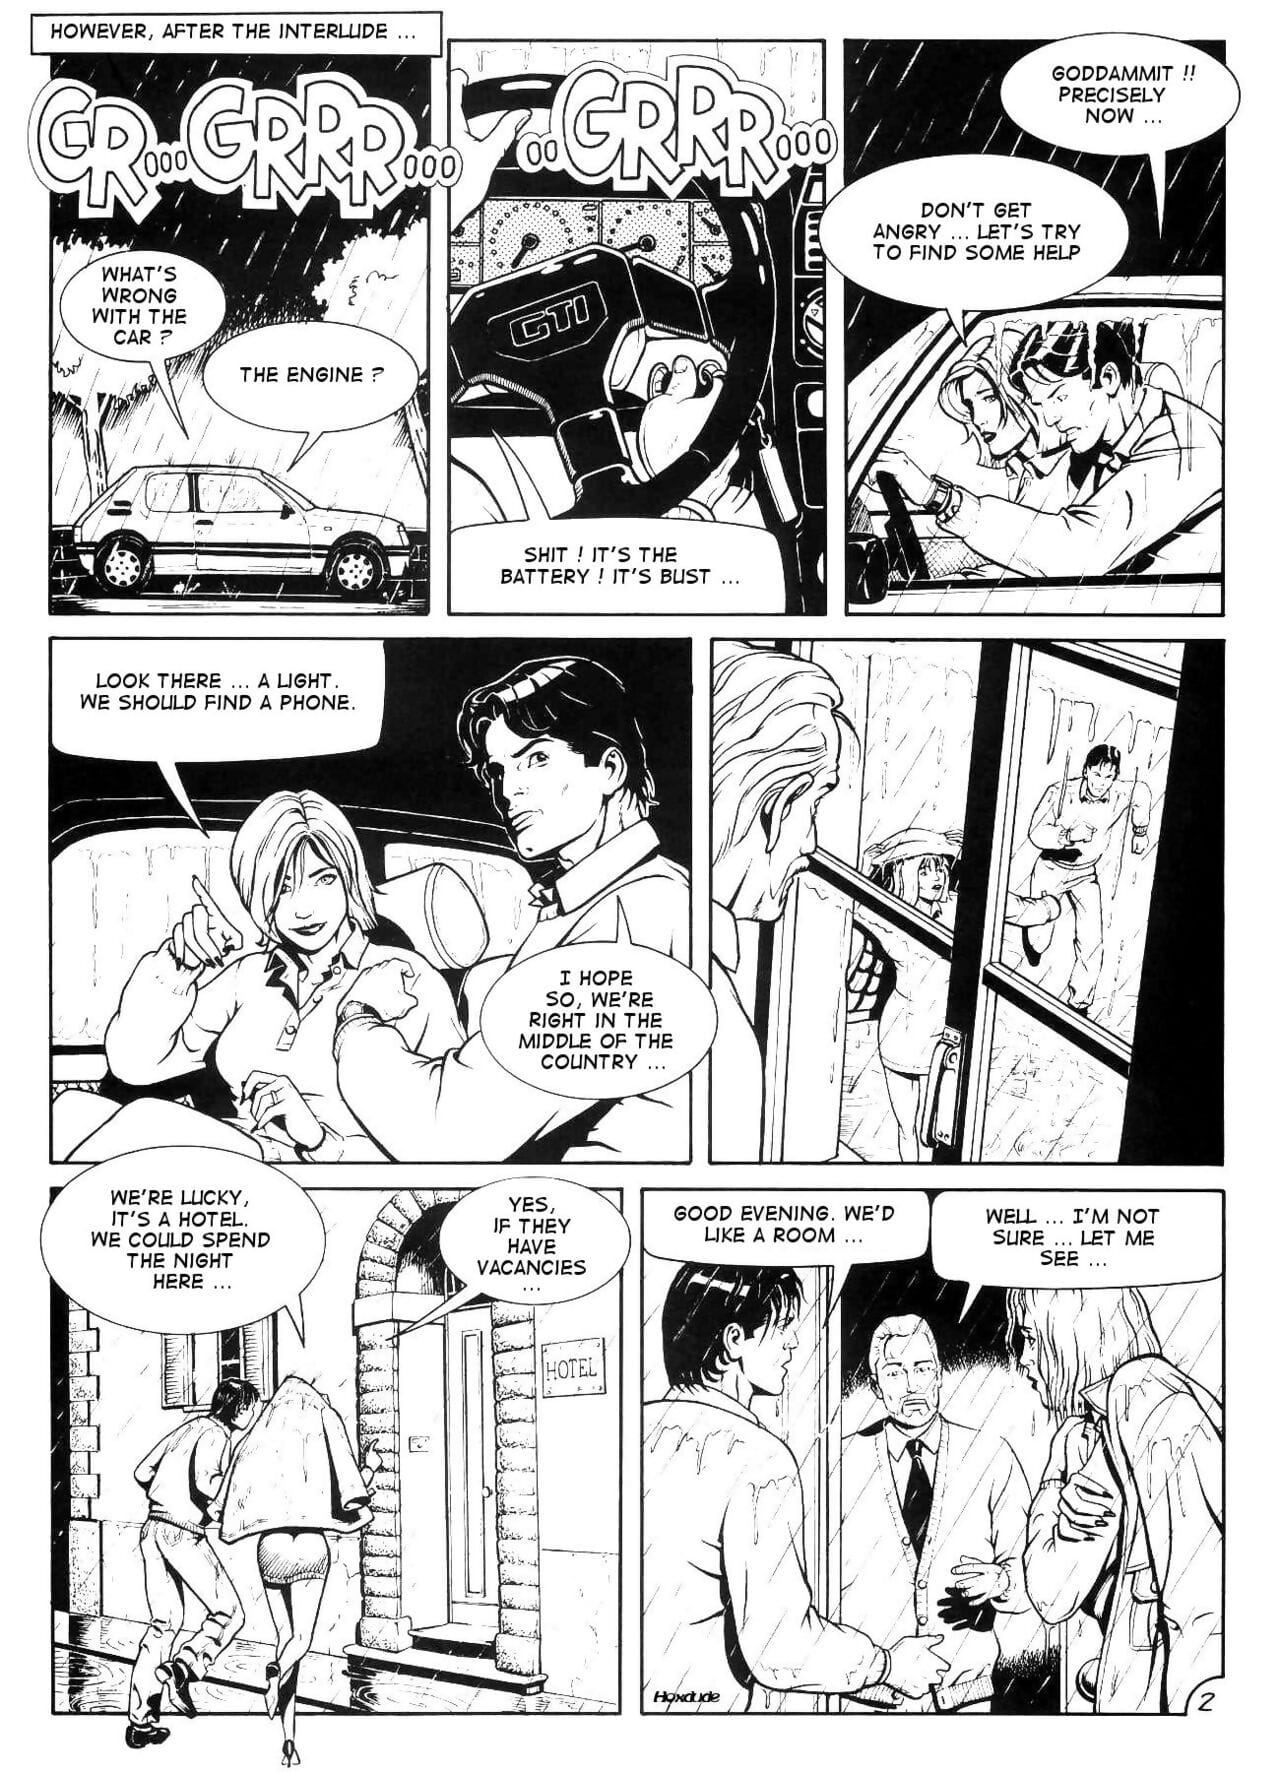 Hotel of Harsh Encounters page 1